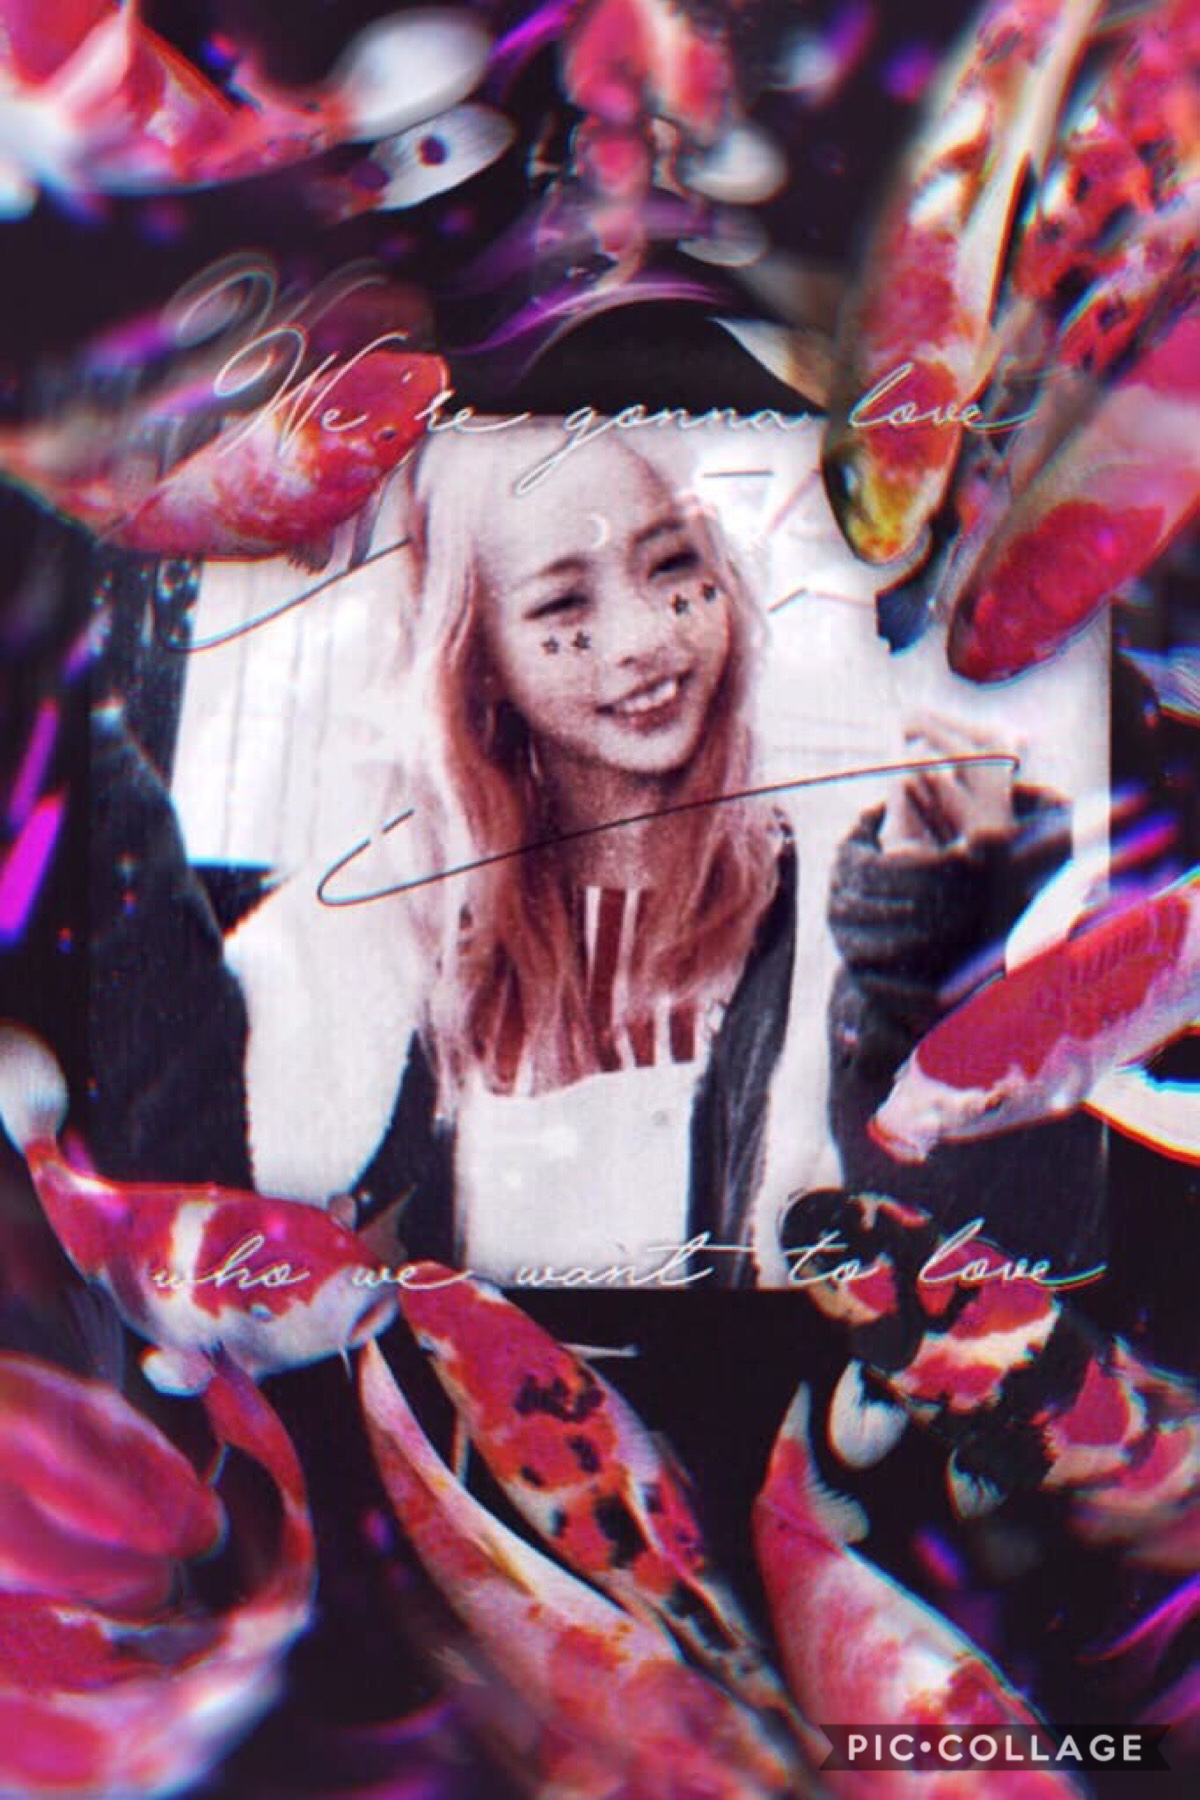 ☁️Katie has smth to say🐙
•••
Collab with the AMAZING 
@GoodMorningMars👏👏
Marcus, dude this is art ok?
Agh Vivi from Loona is ADORABLE💕Also anyone notice how much she looks like Wengi when she smiles(see remix’s) cry for me it’s leg workout day😂